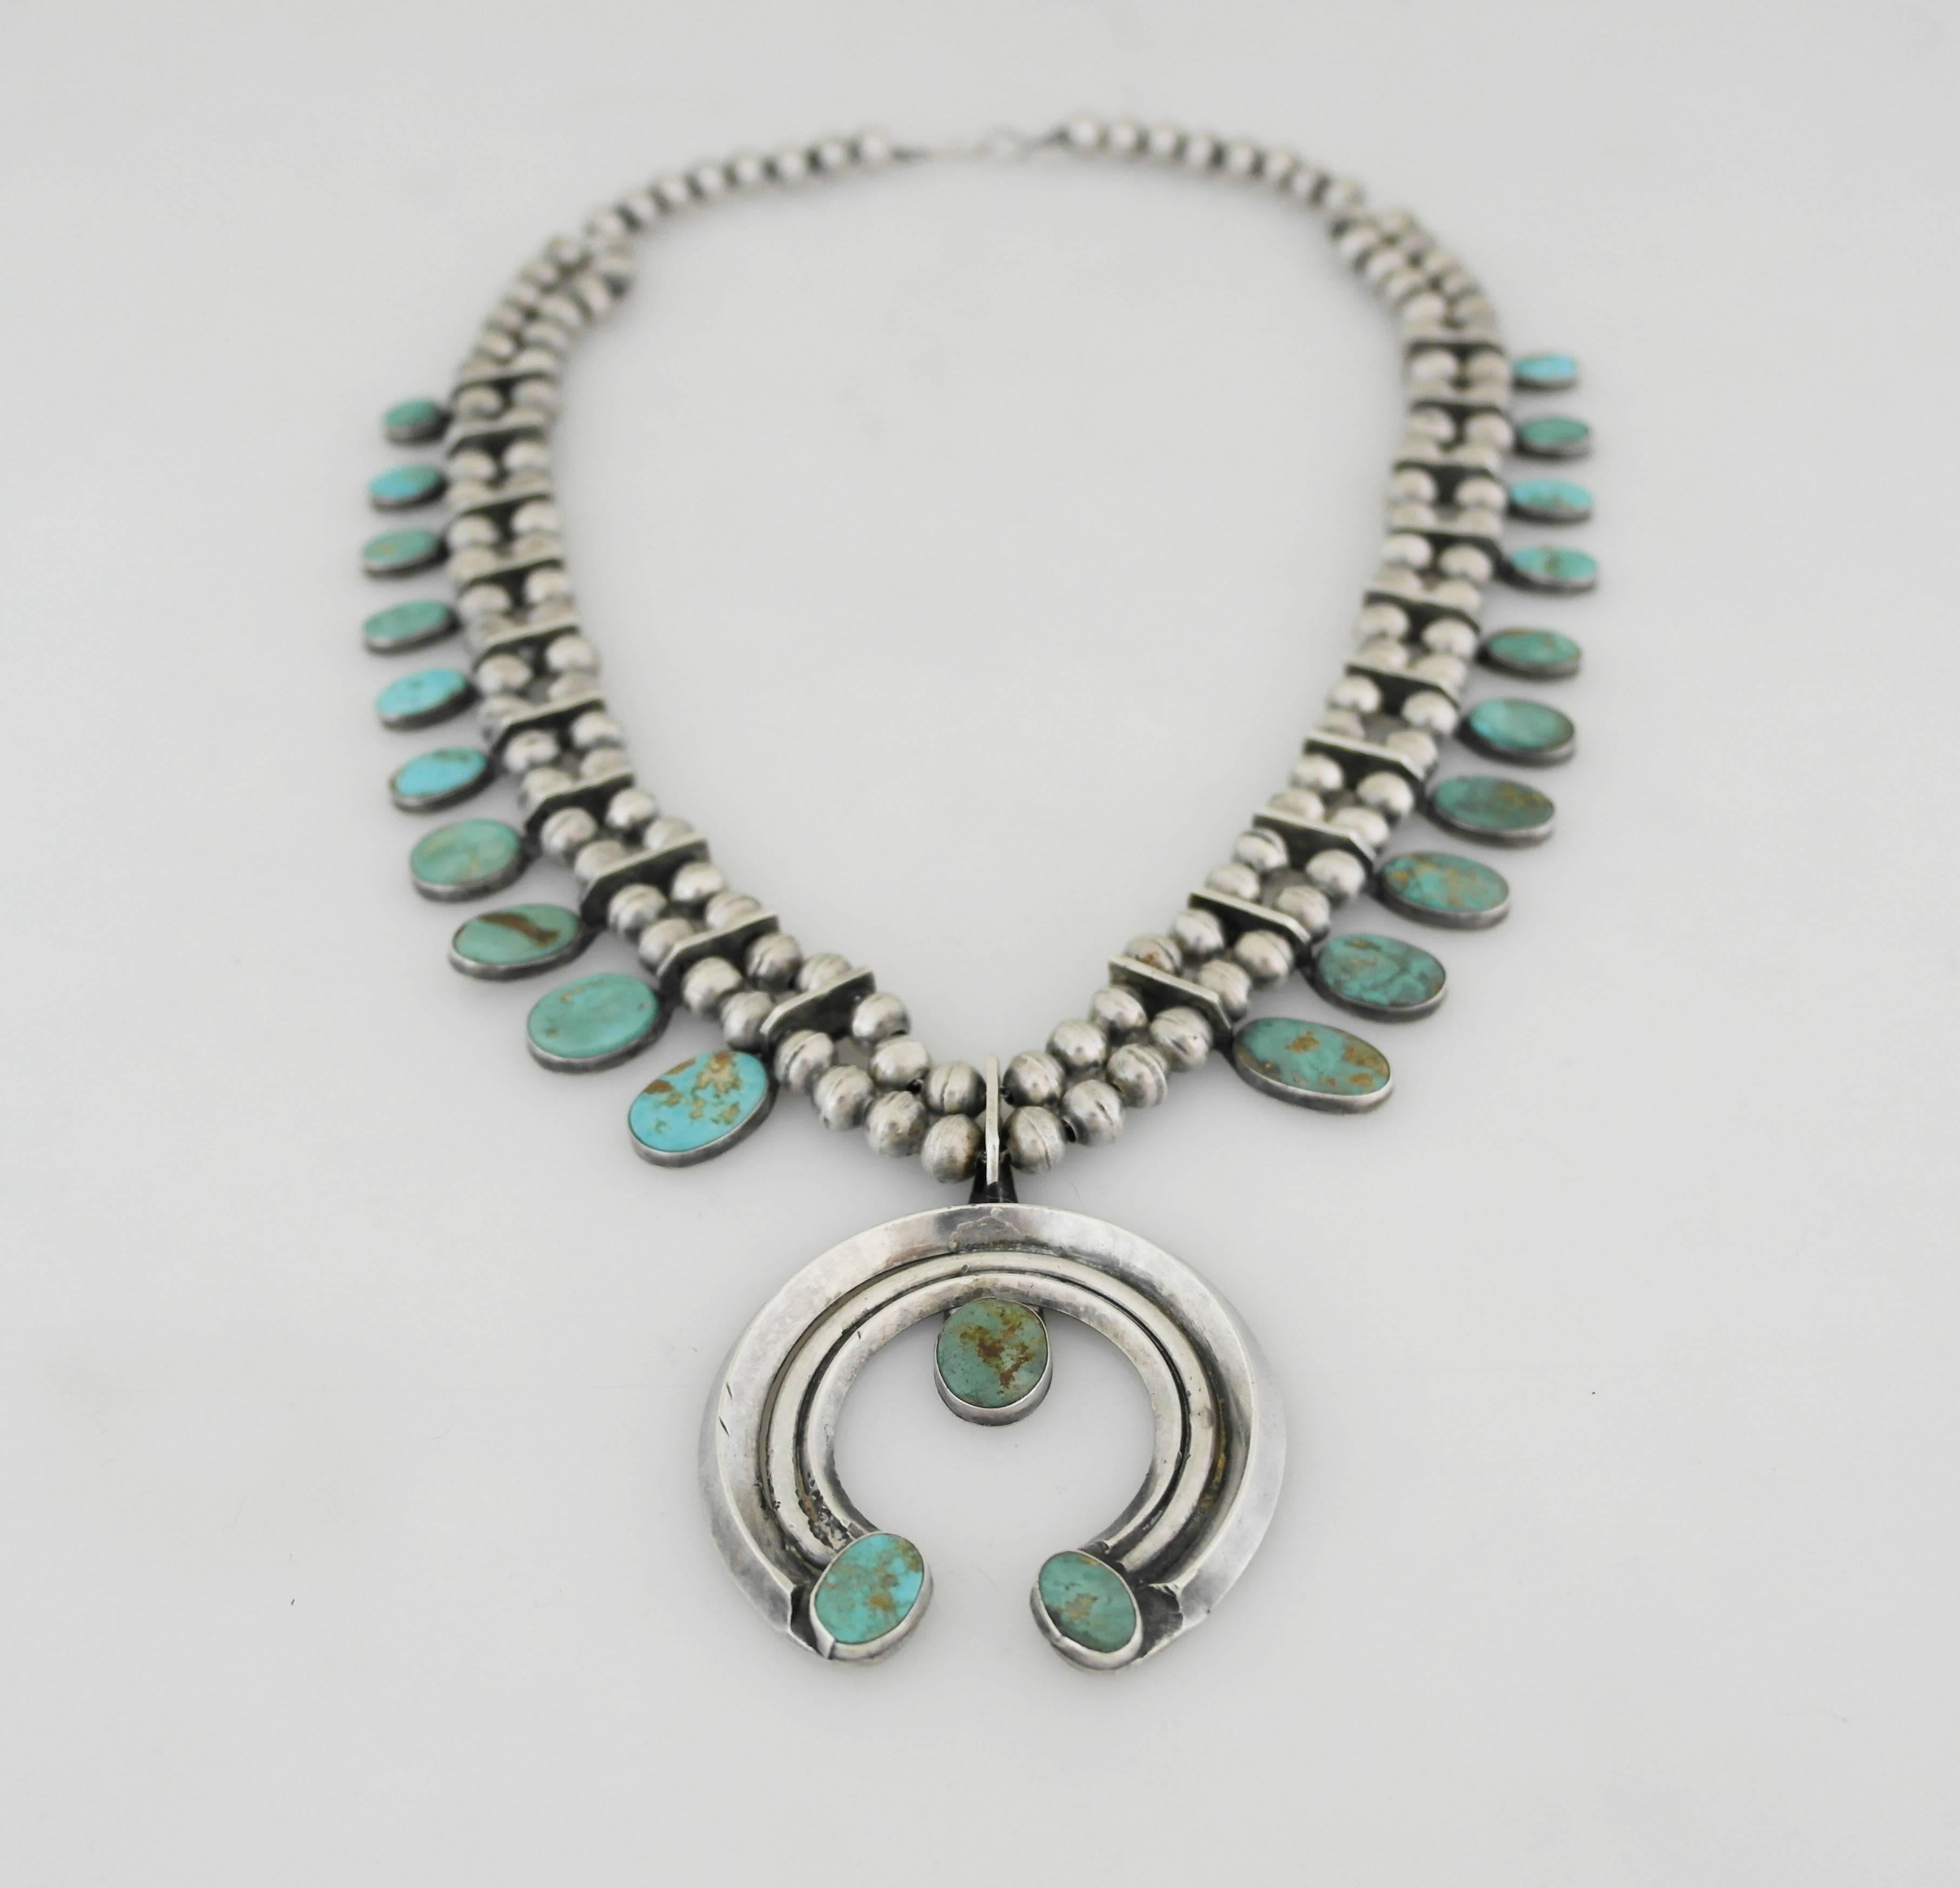 Women's 1990 Native American Squash Blossom Turquoise Sterling Silver Necklace